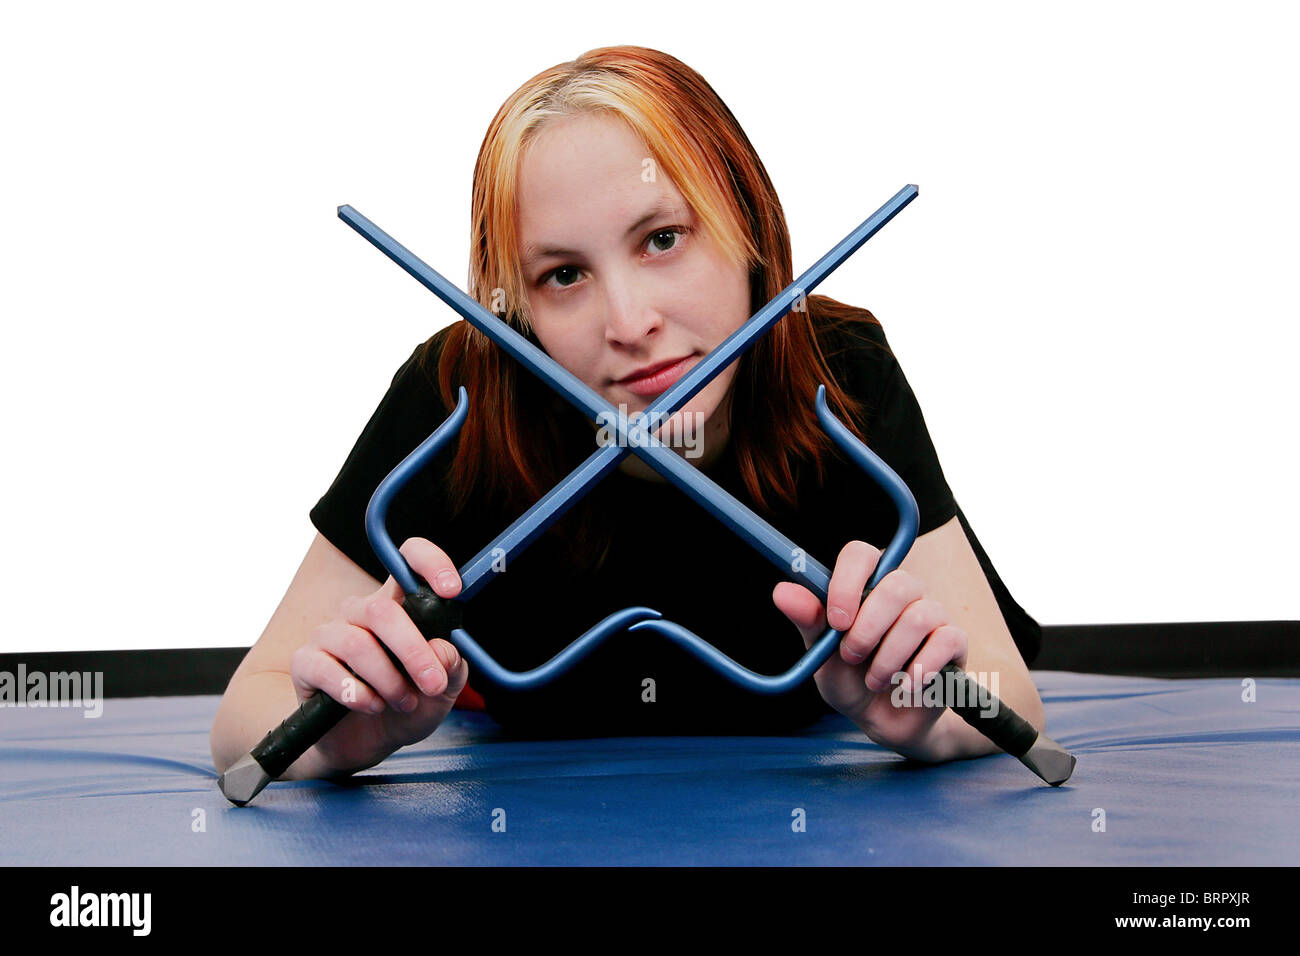 beautiful MMA young woman ready with crossed sai weapons Stock Photo